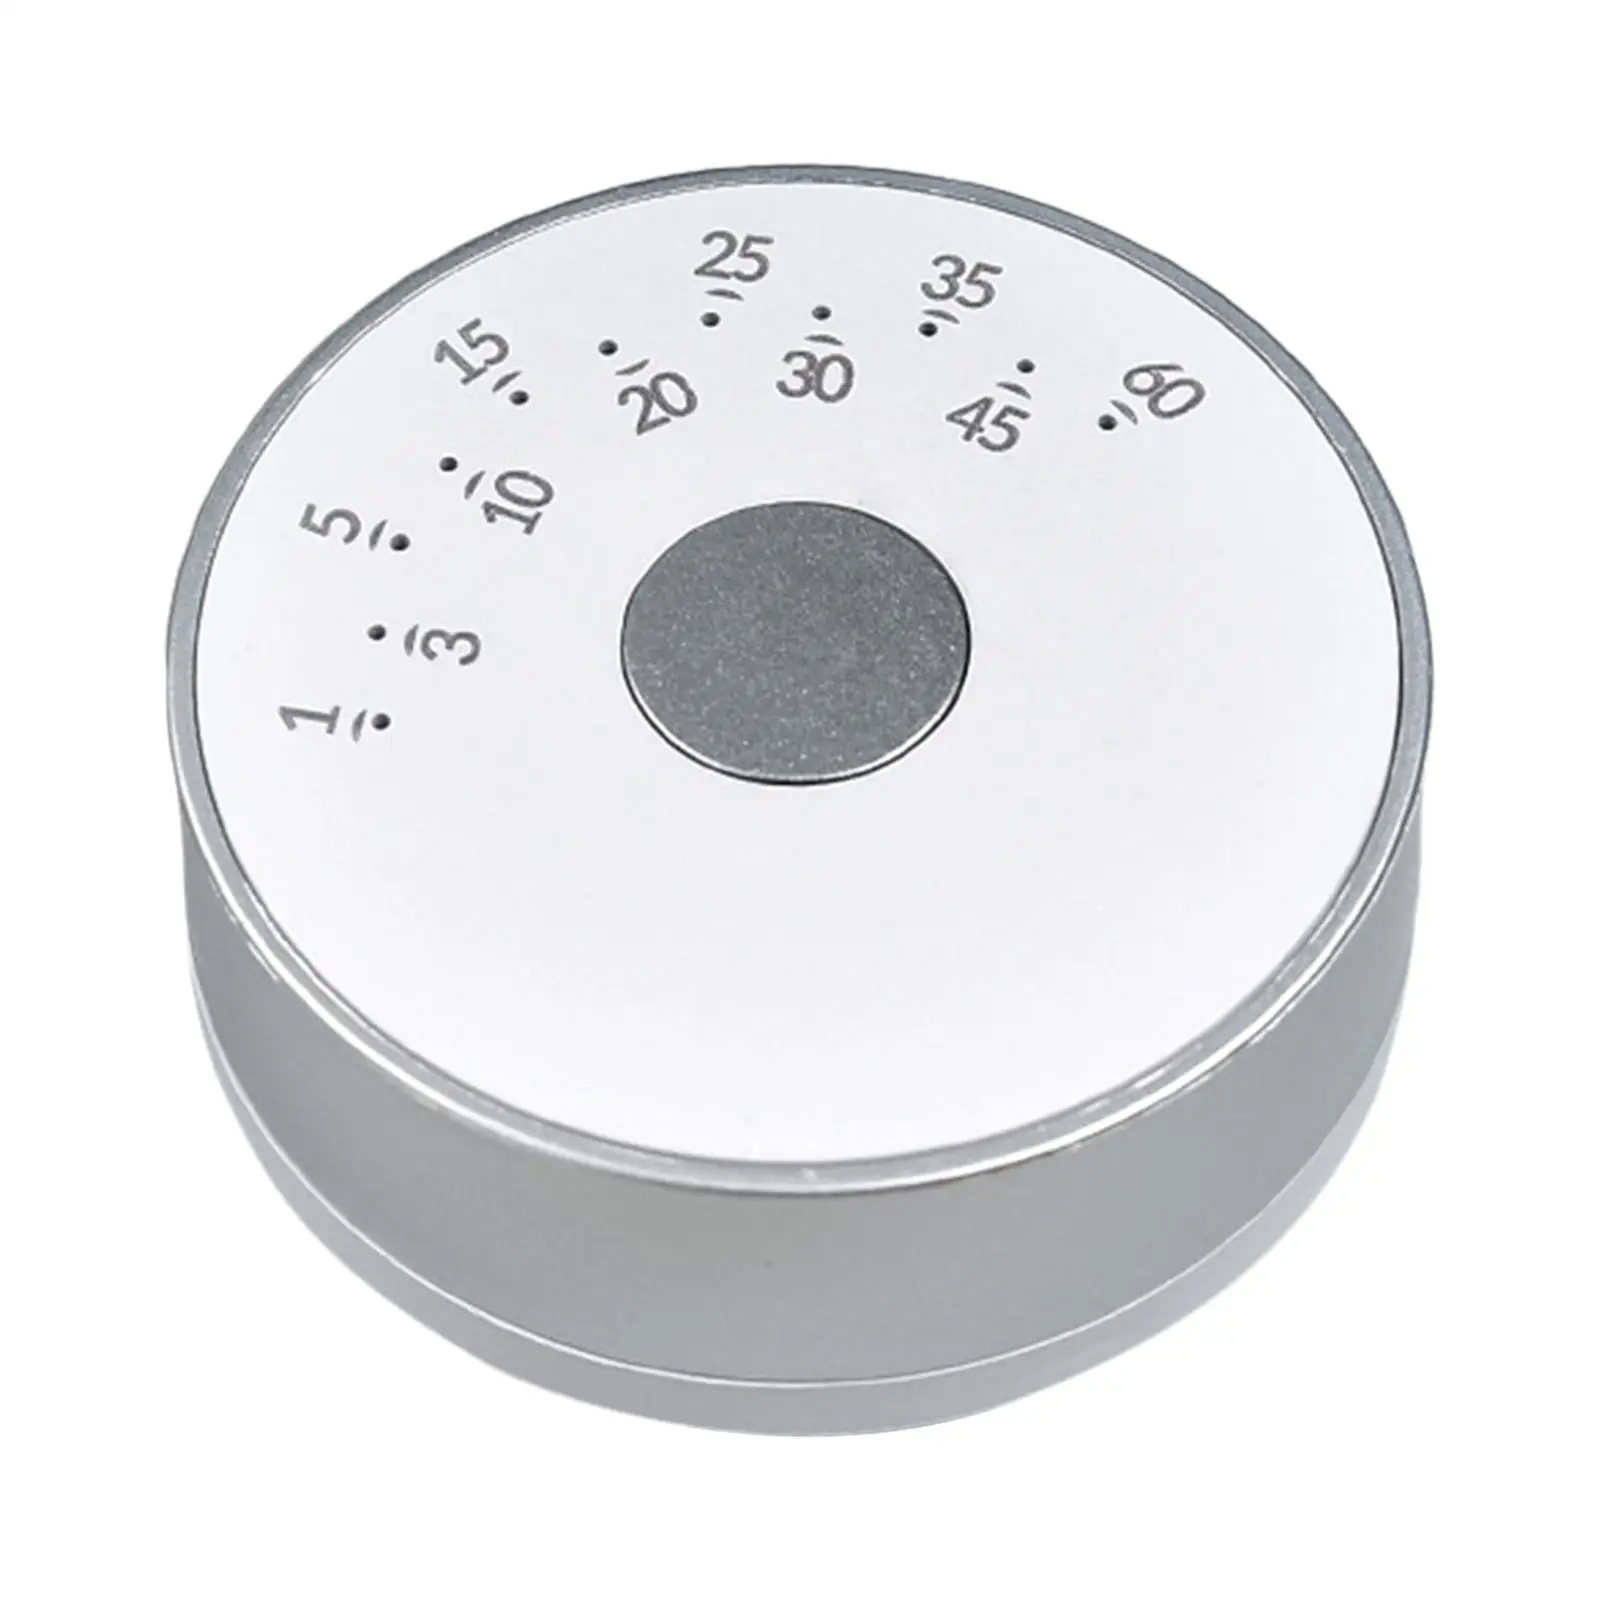 Digital Timer Quiet Egg Reminder Learning Management Kitchen Timer for Sports Games Cooking Outdoor Classroom Exercise Training